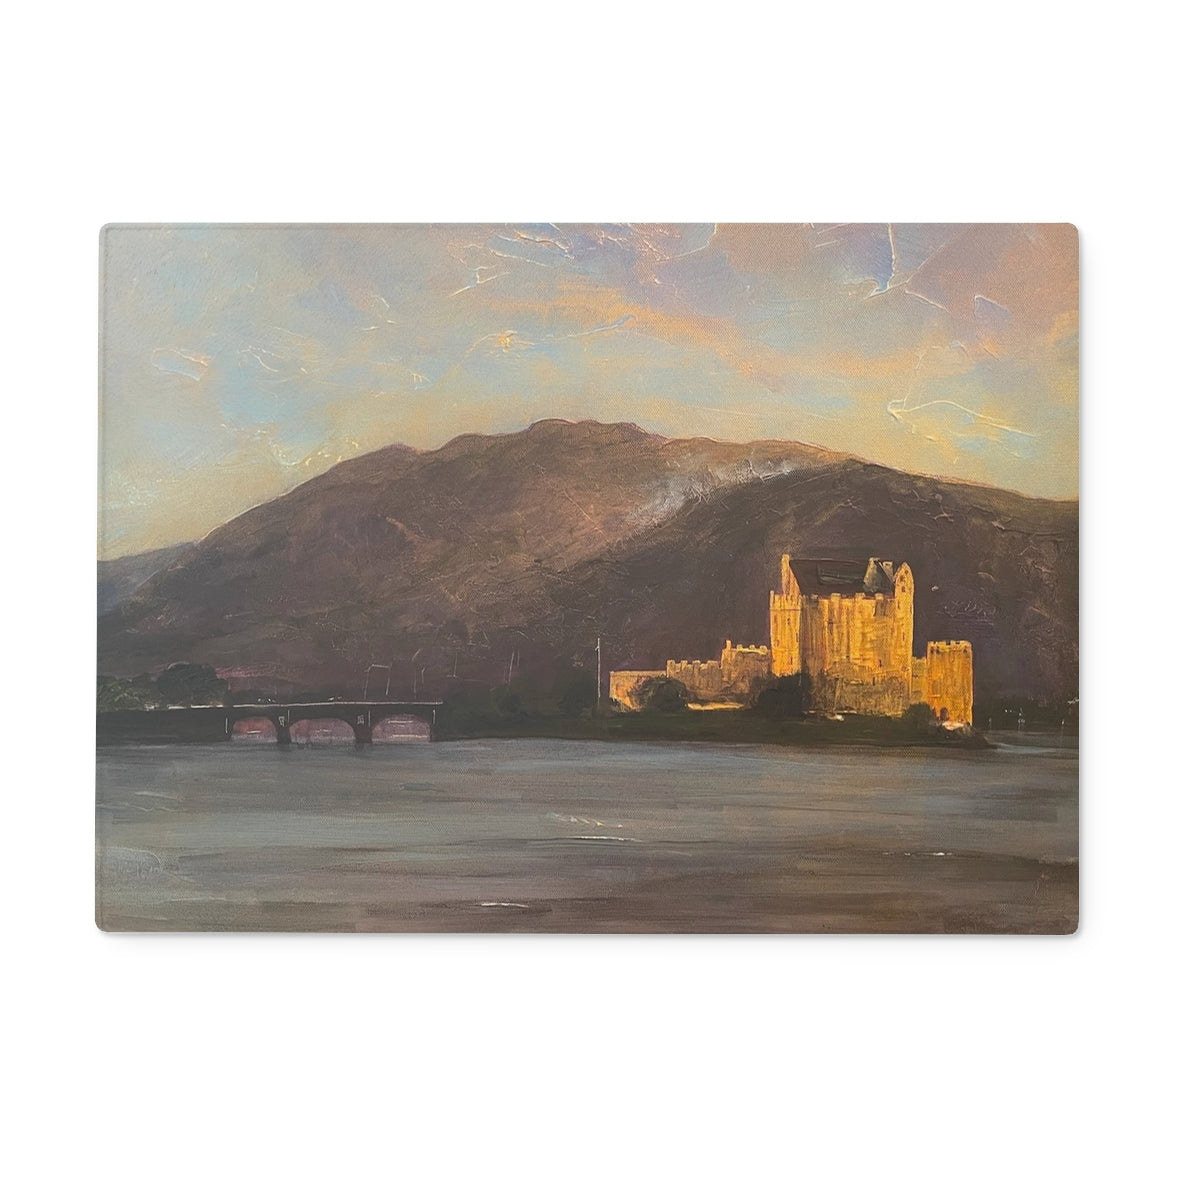 Eilean Donan Castle Art Gifts Glass Chopping Board-Glass Chopping Boards-Historic & Iconic Scotland Art Gallery-15"x11" Rectangular-Paintings, Prints, Homeware, Art Gifts From Scotland By Scottish Artist Kevin Hunter